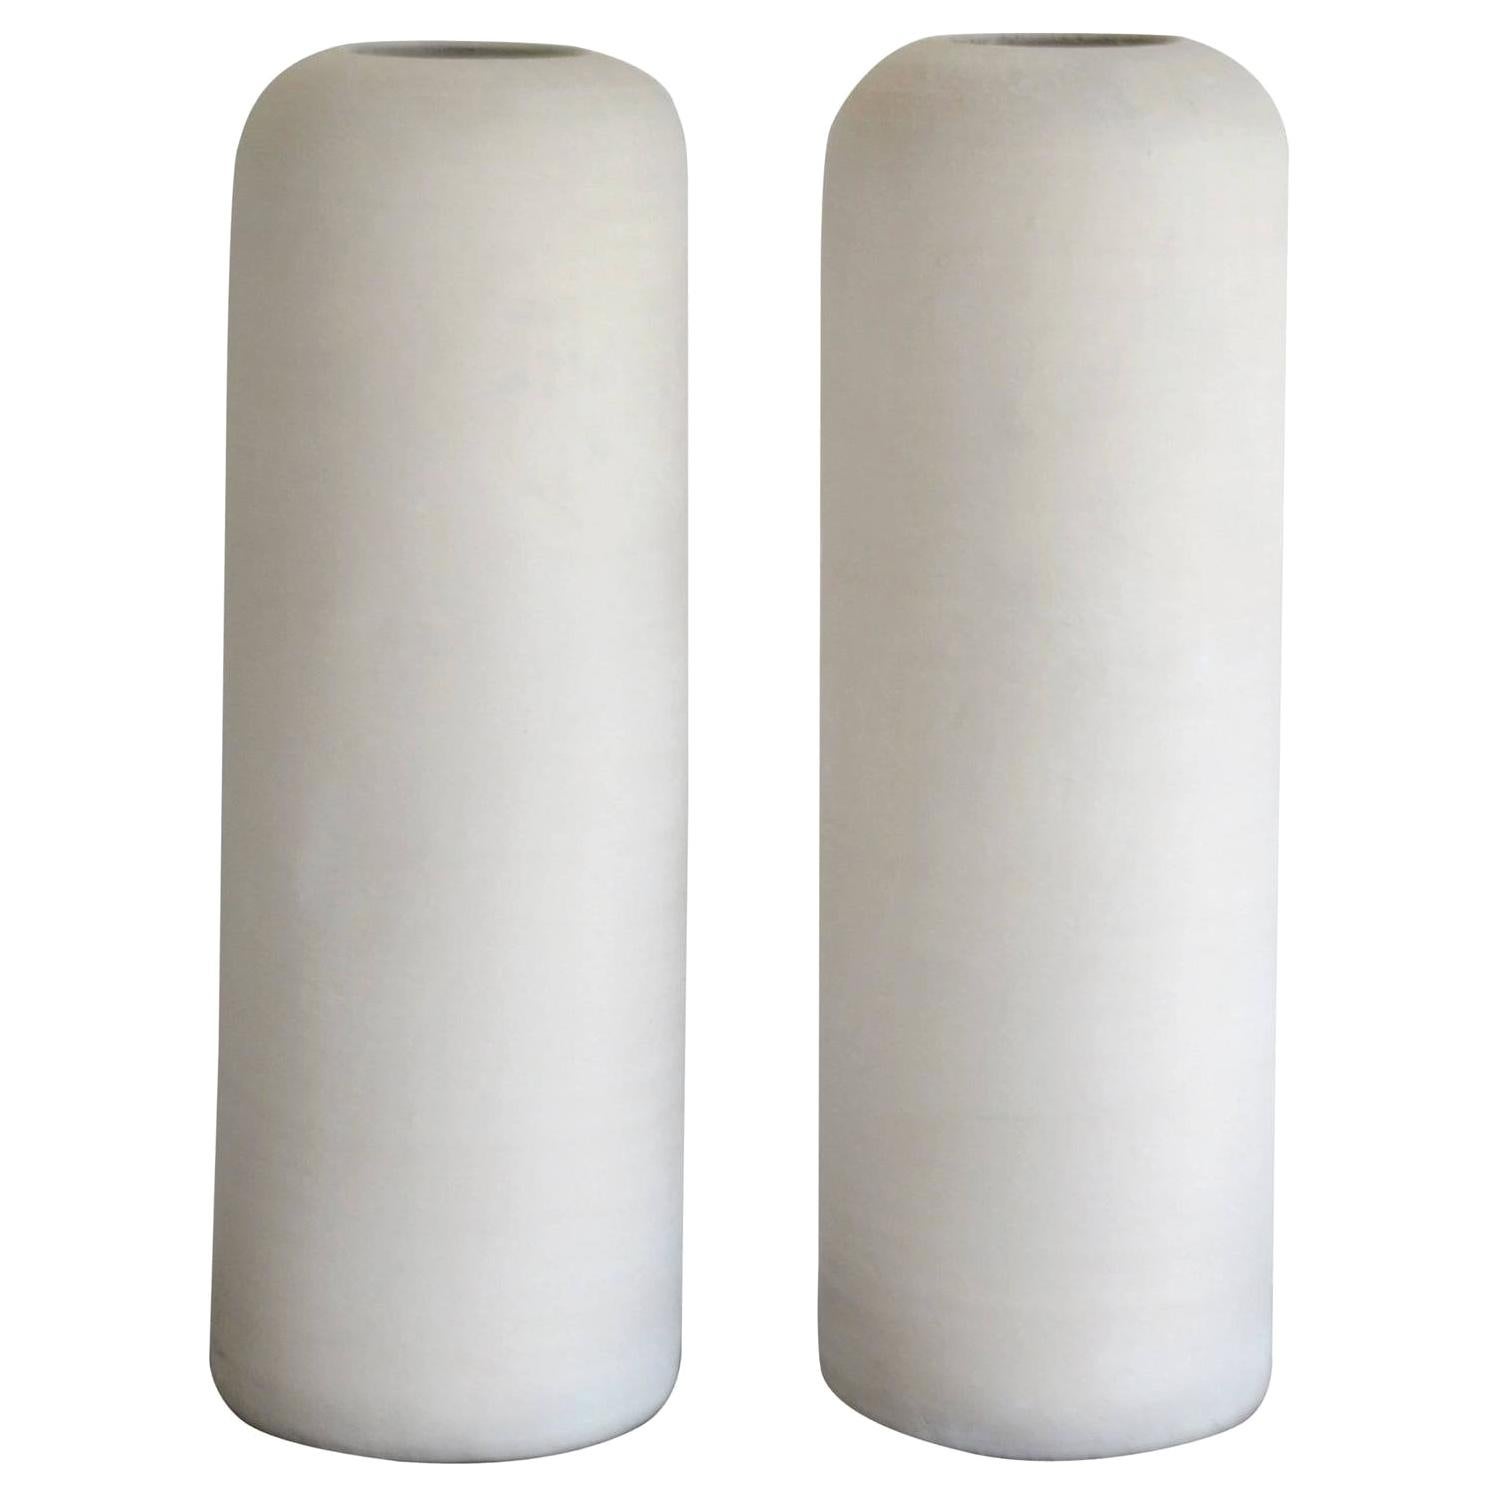 Pair of Postmodern Organic Form Hand Thrown Vases For Sale